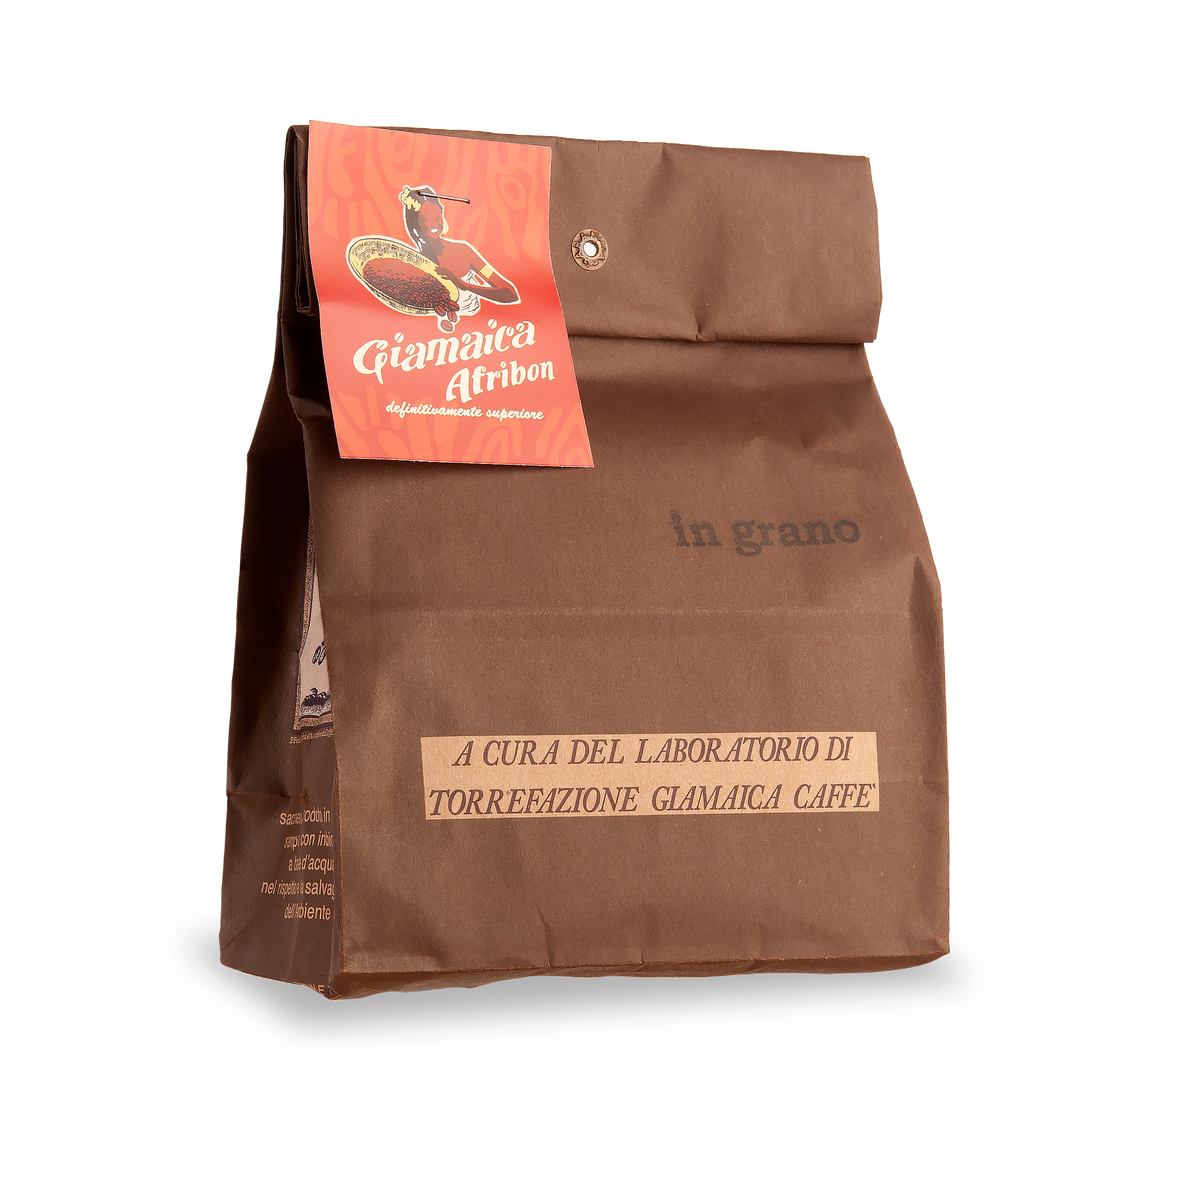 Coffee Afribon 4 x 250g - PRE-ORDER - Contact us for further information (indulge@flemmings.wine)